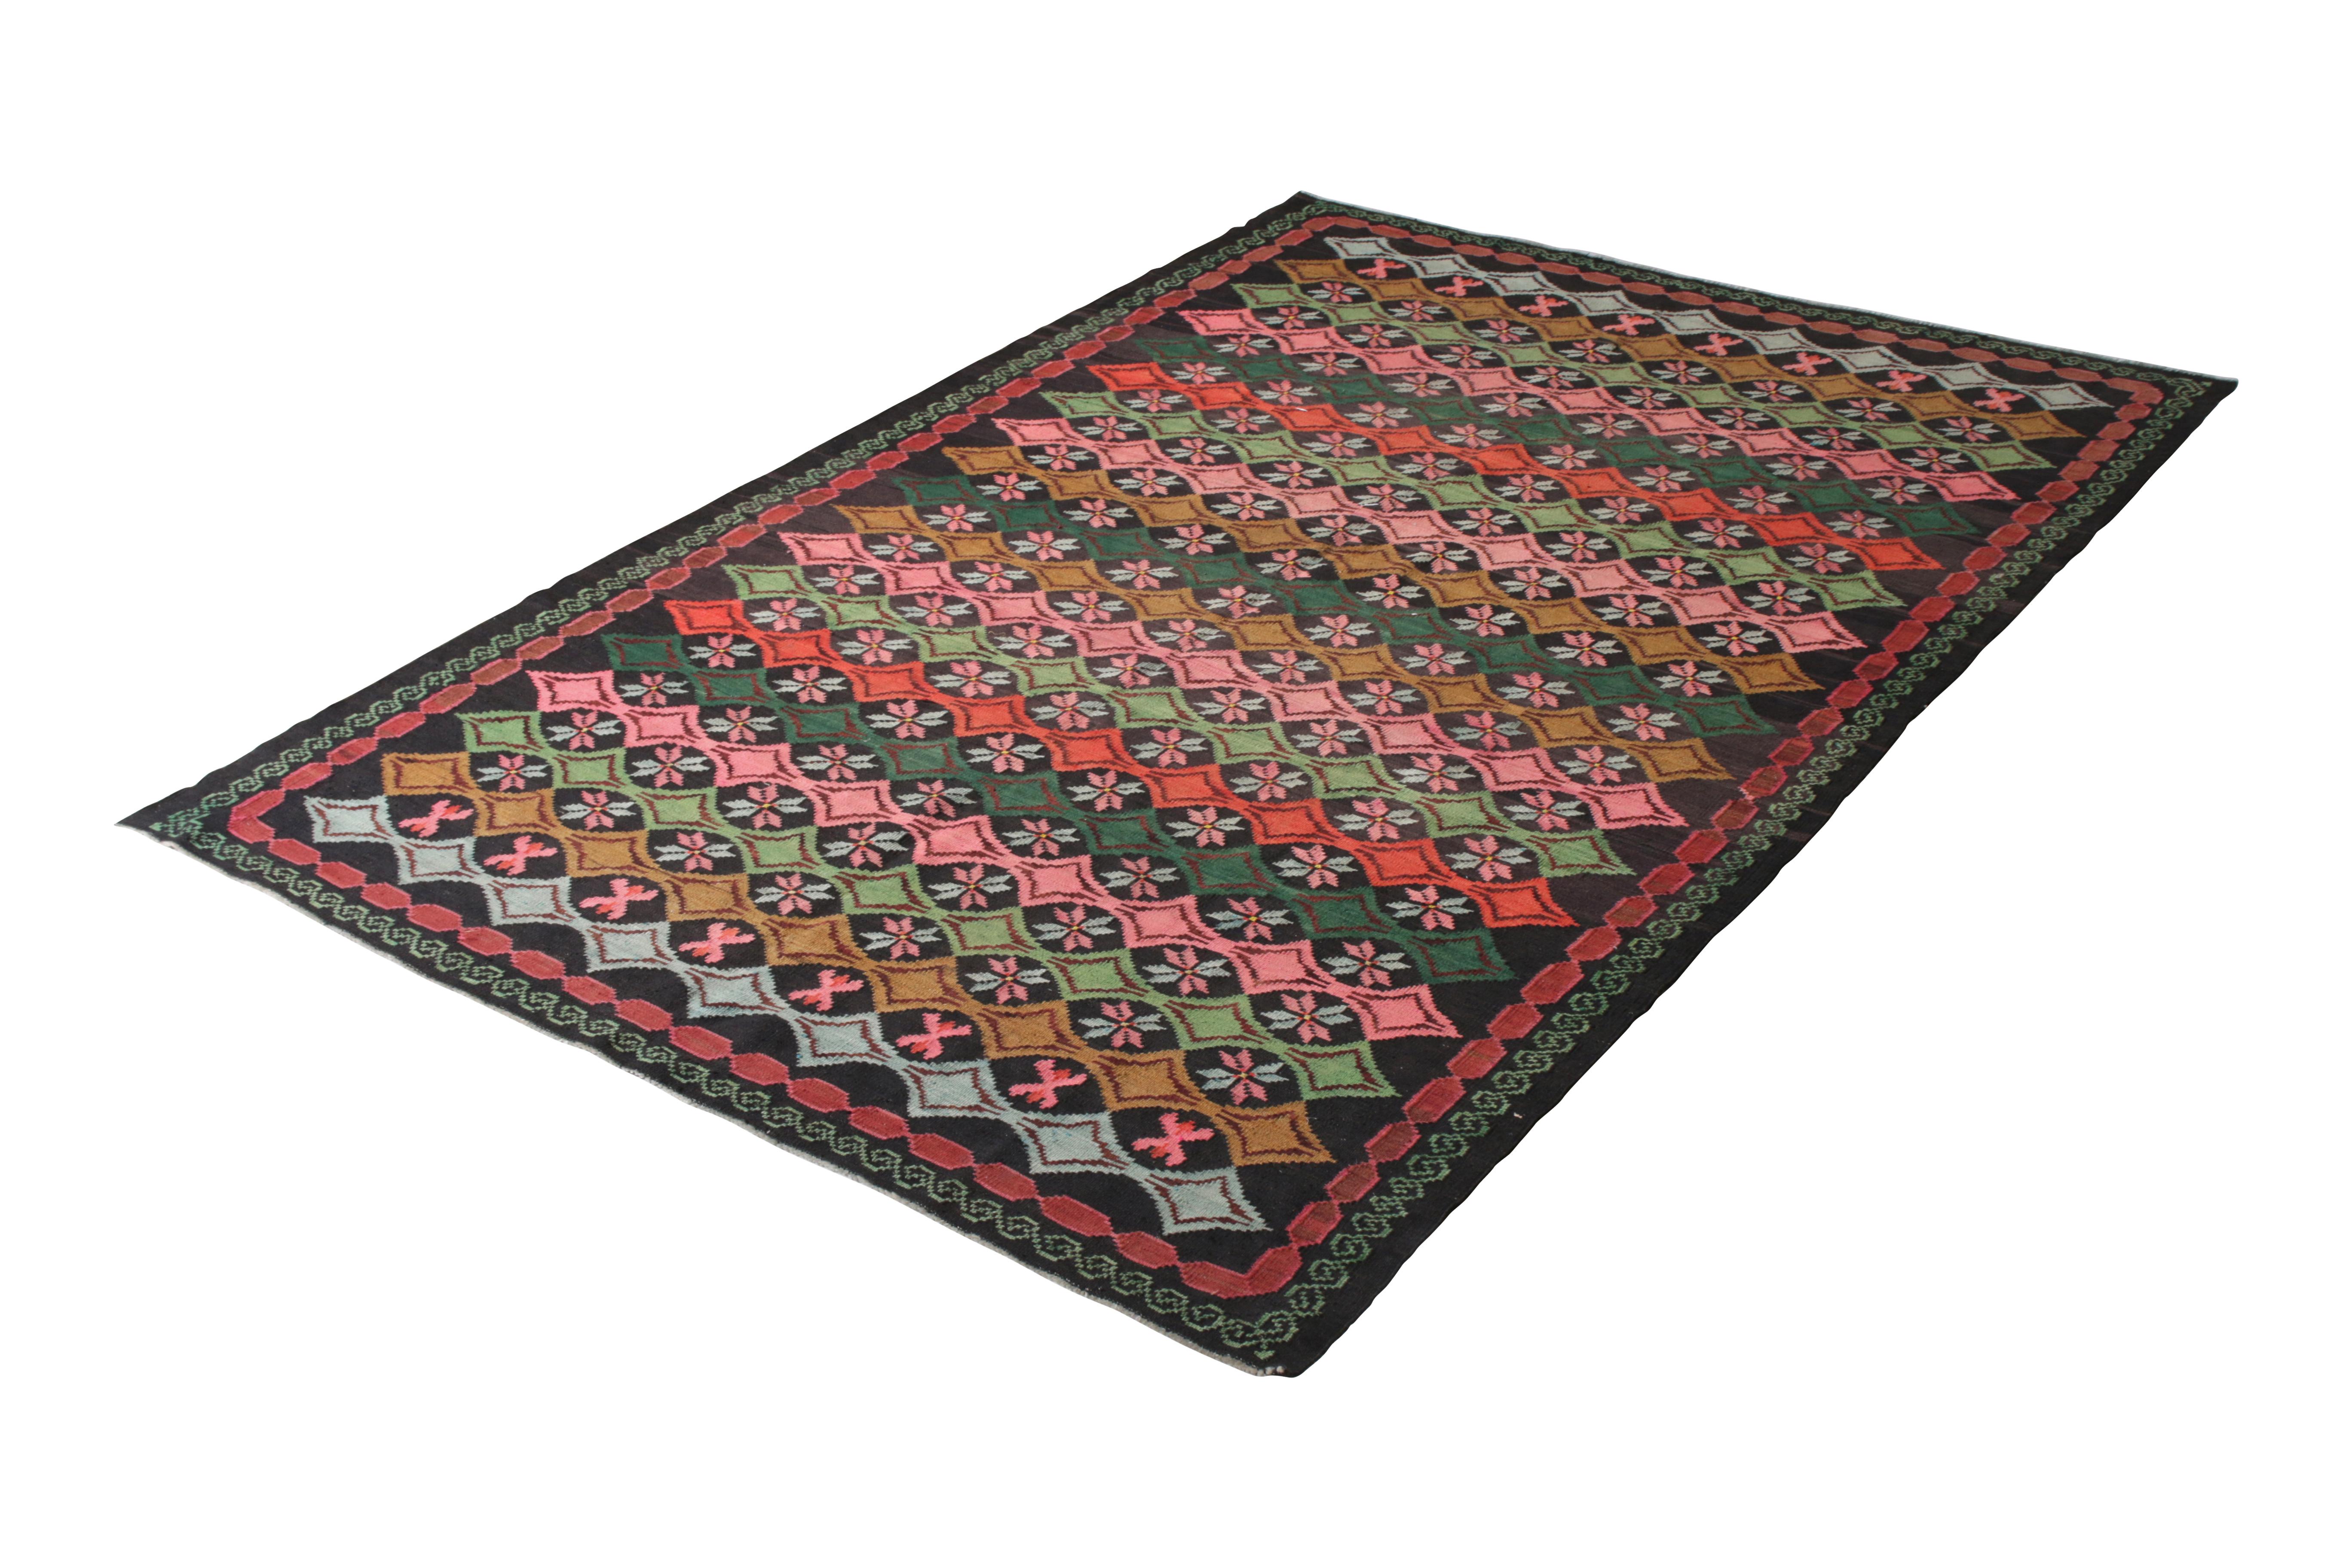 Handwoven in a wool flat-weave originating from Turkey, circa 1950-1960, this vintage Kilim rug connotes a midcentury Turkish Kilim rug design in a notably unique colorway, enjoying an uncommon play of rich forest green with accenting hues of pink,